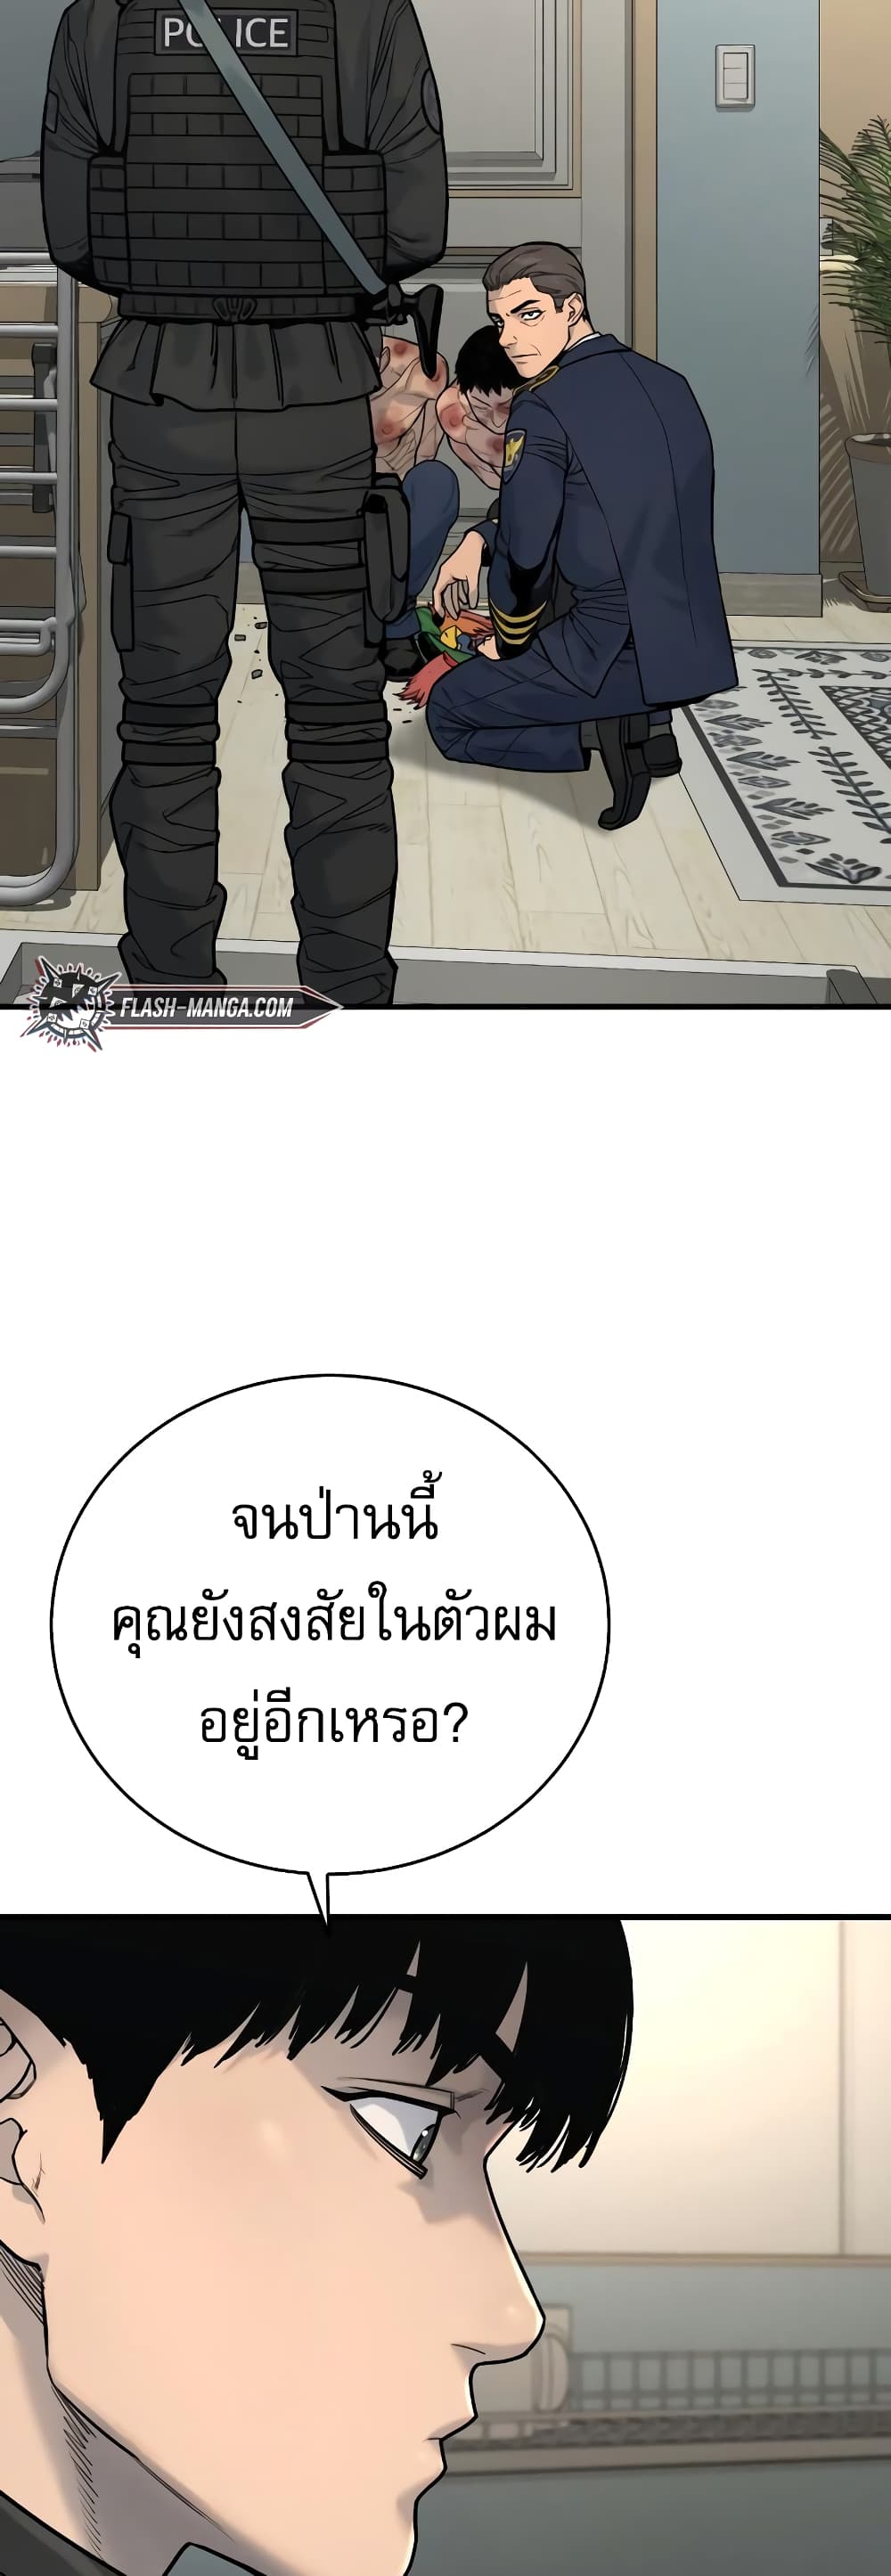 Return of the Bloodthirsty Police ตอนที่ 9 (17)